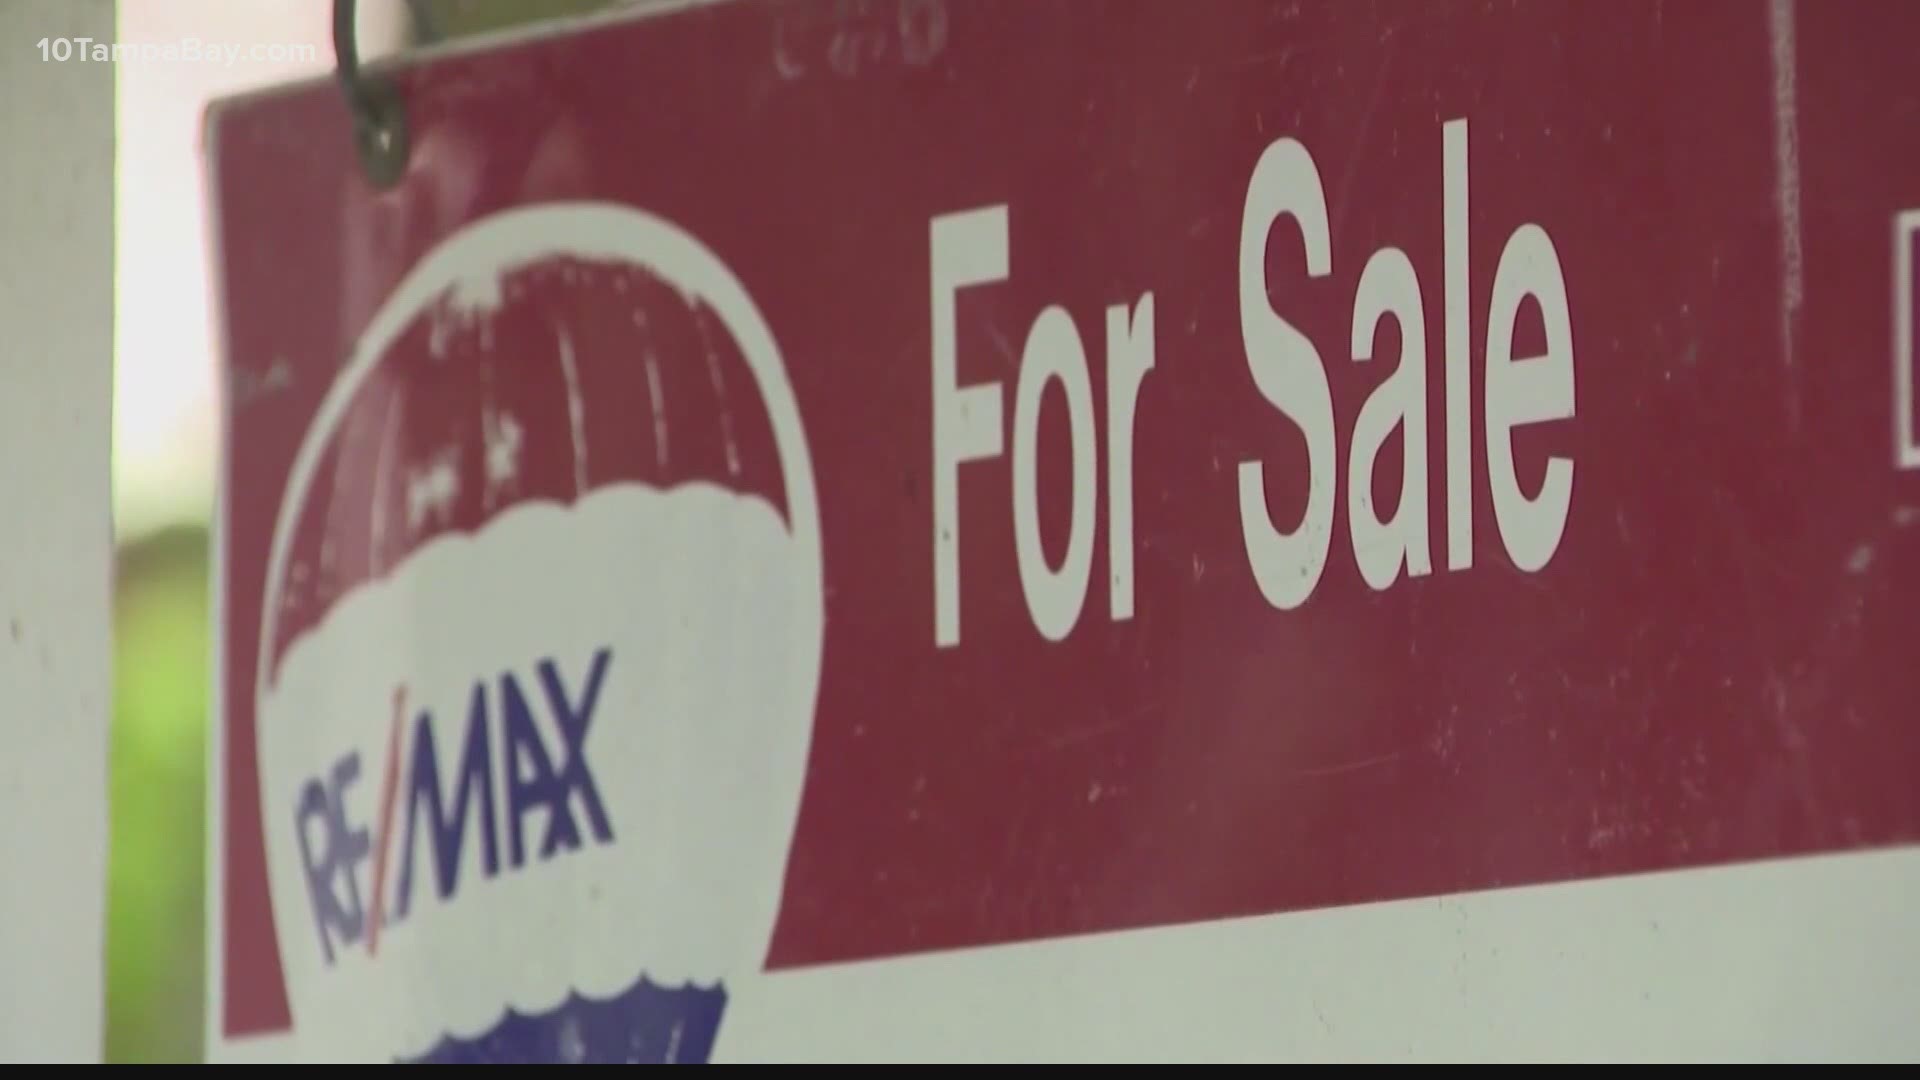 Housing prices have been climbing at a rapid rate to an average price of $350,000 in the Tampa Bay area.